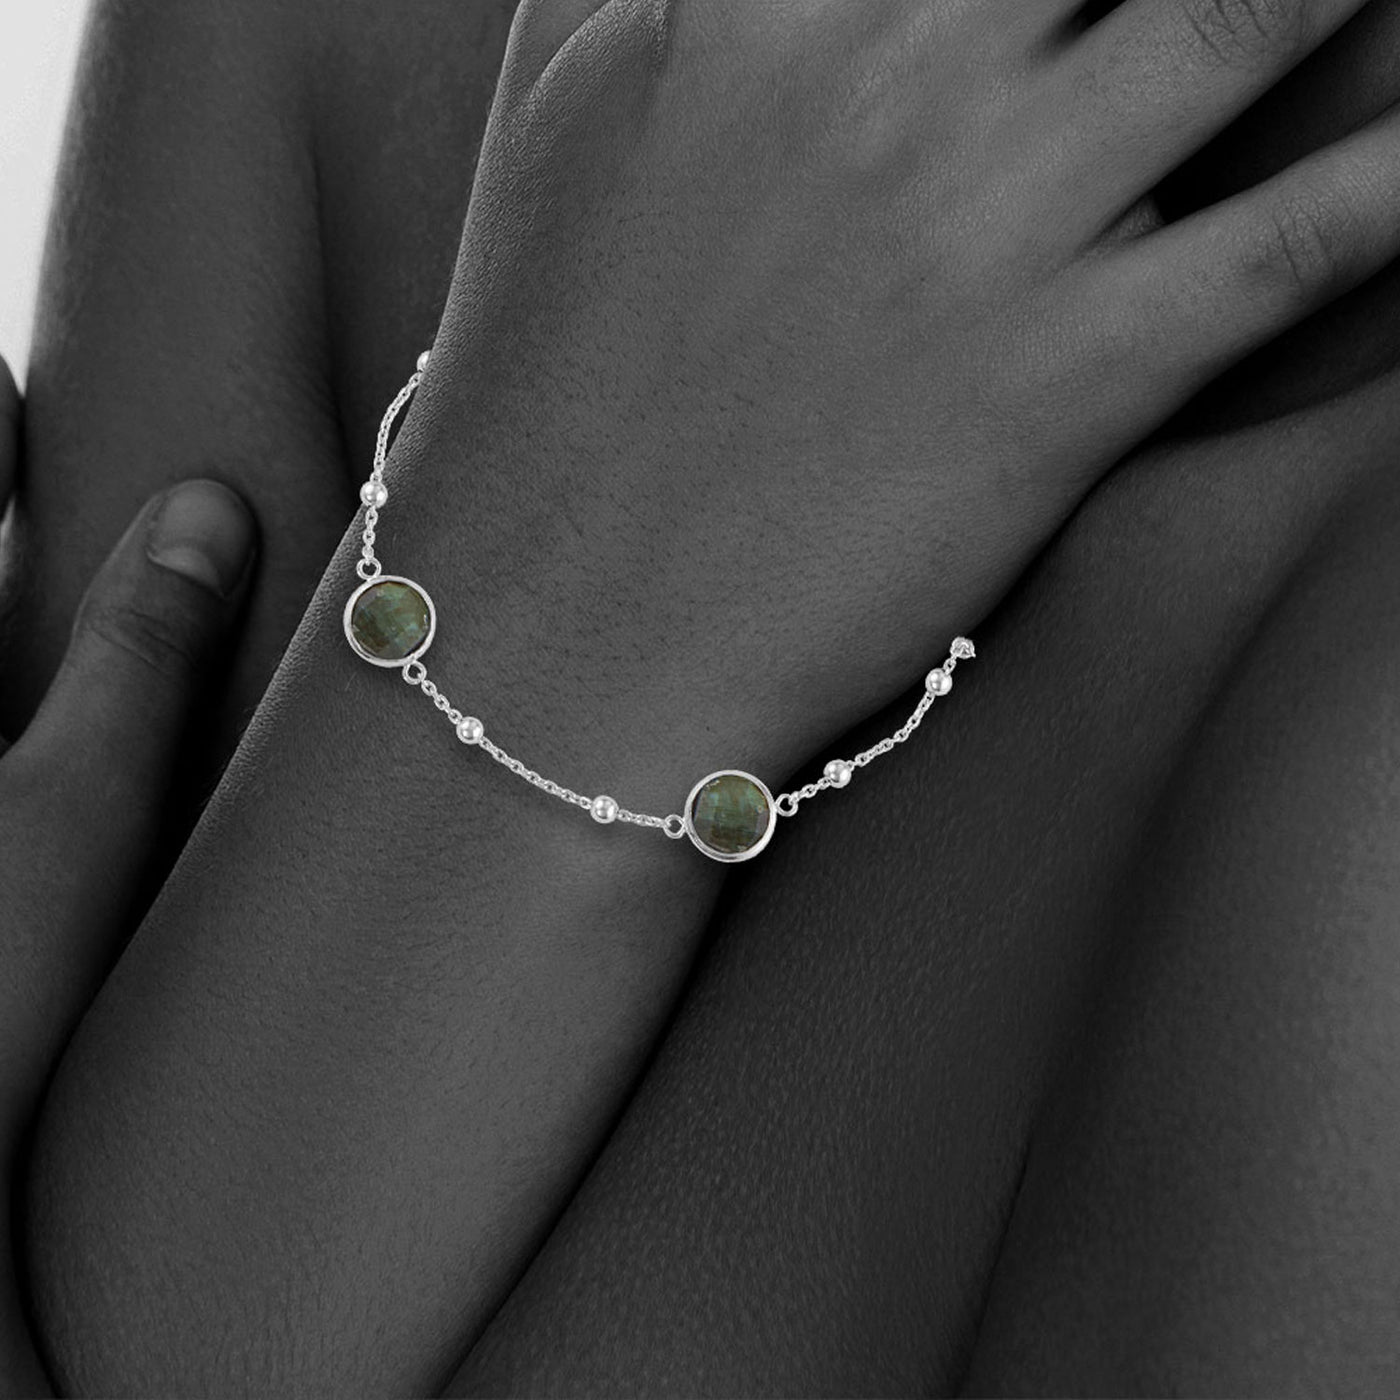 Sterling Silver Bezel Bracelet With Small Silver Stations And Labradorite Round Gemstones